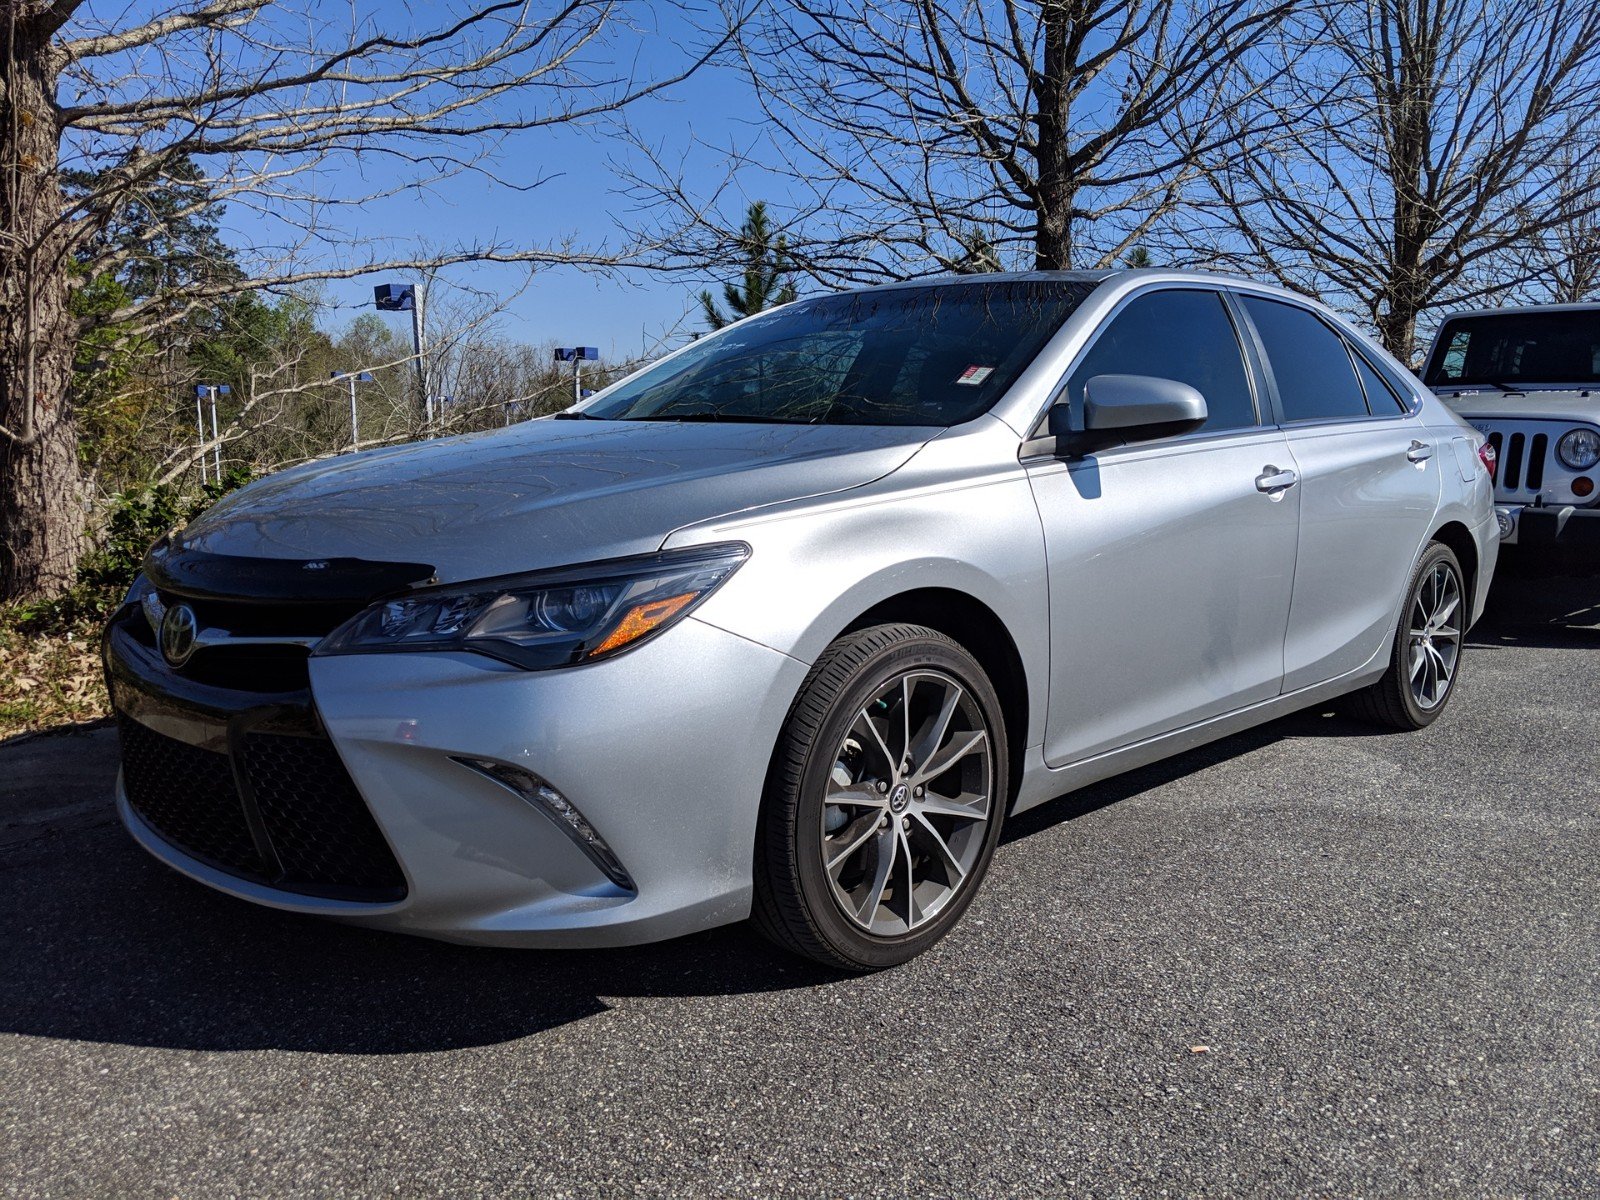 Pre-Owned 2017 Toyota Camry XSE V6 4dr Car in Tallahassee #U741125A